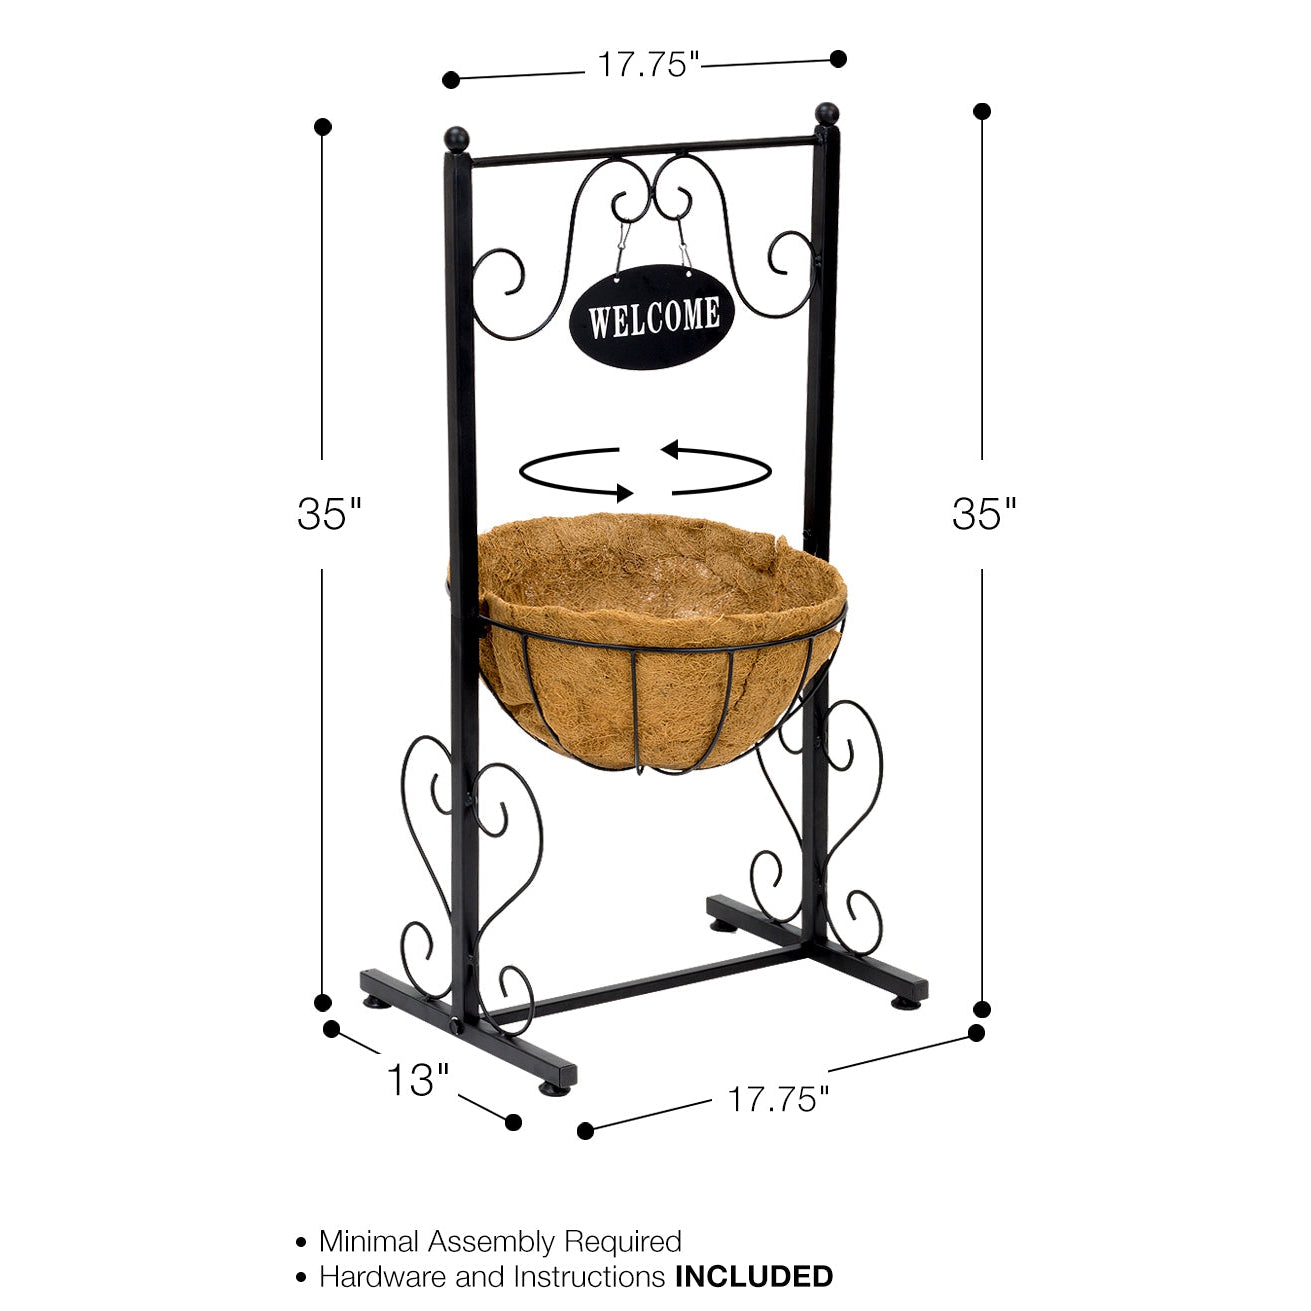 Welcome Planter Basket Stand - Sorbus Home